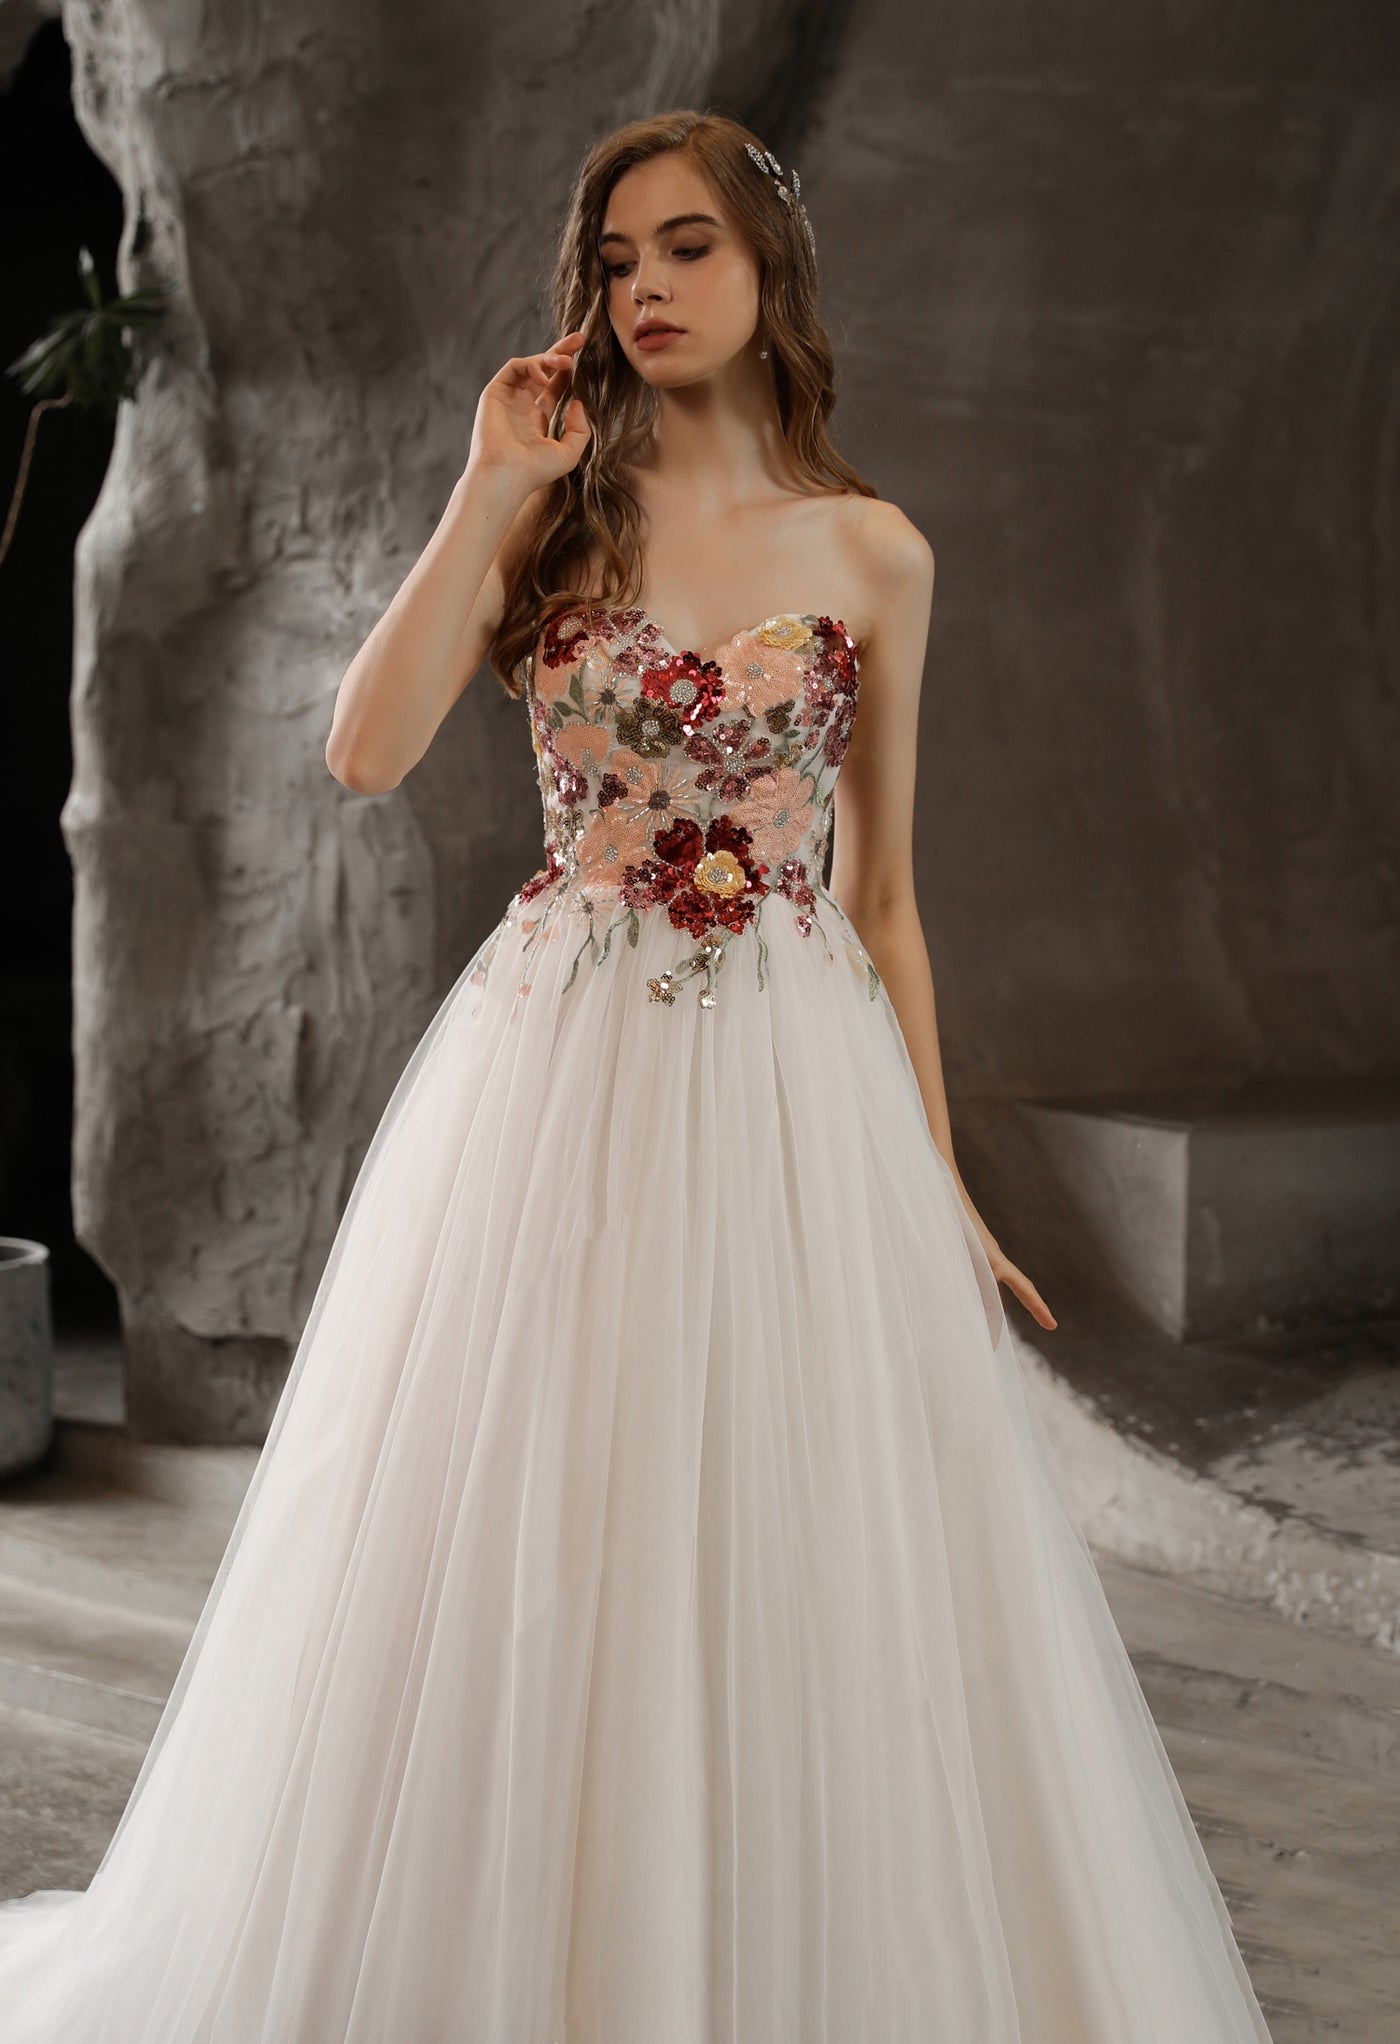 A woman in a Strapless Princess A-line Bridal Gown with Tulle Skirt and Floral Beaded Bodice from Bergamot Bridal, with flowers on it.